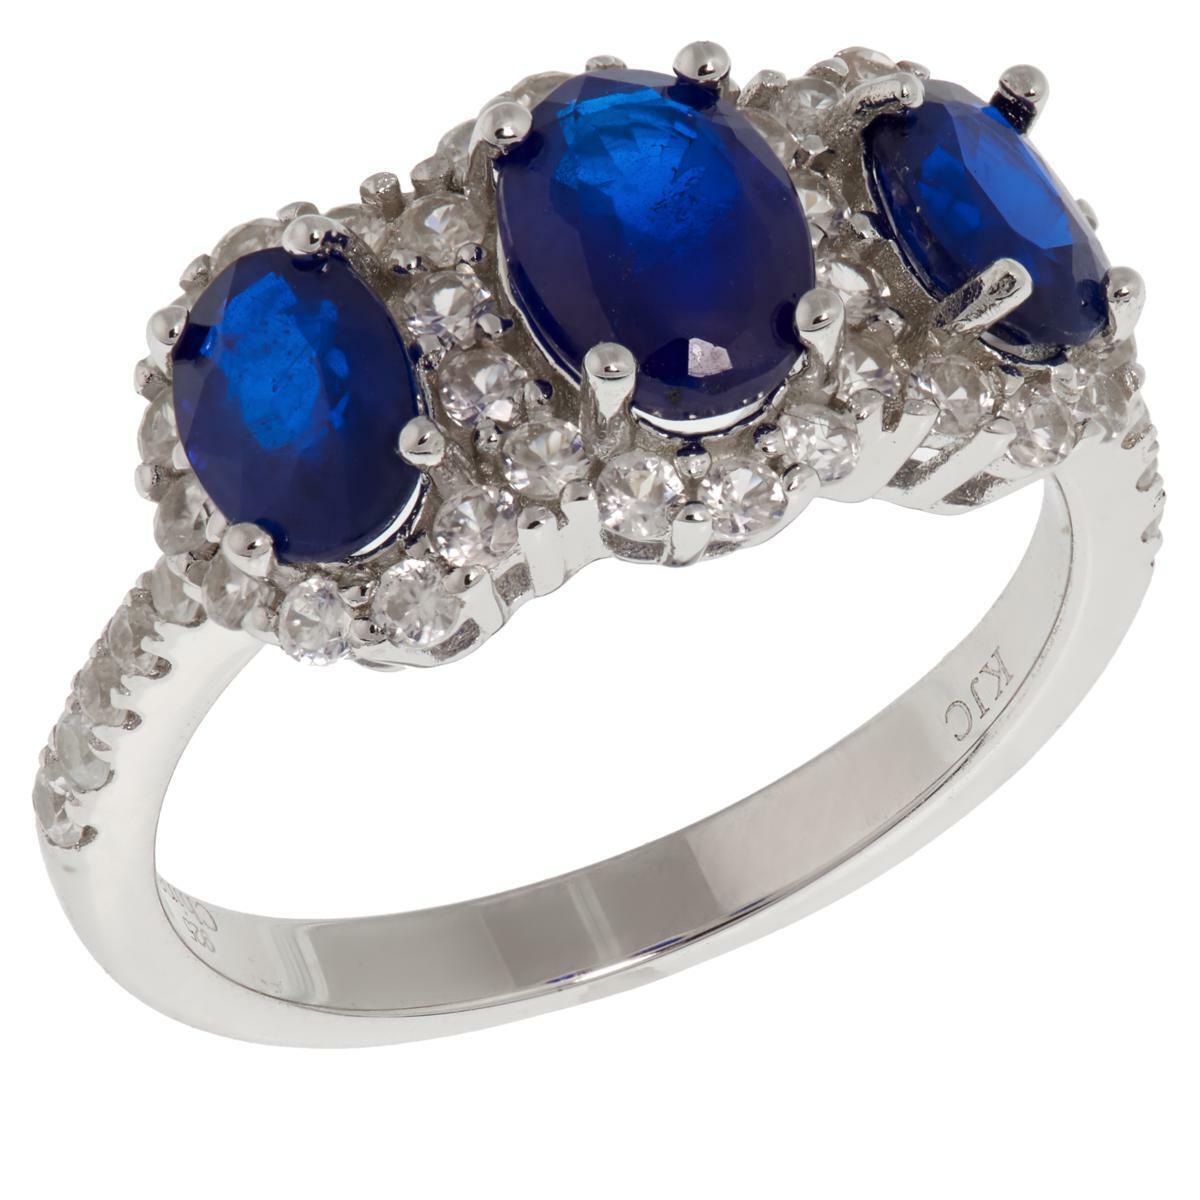 Colleen Lopez 1.53Ctw Blue Spinel & White Zircon 3 Stone Ring Size 5 Hsn $200